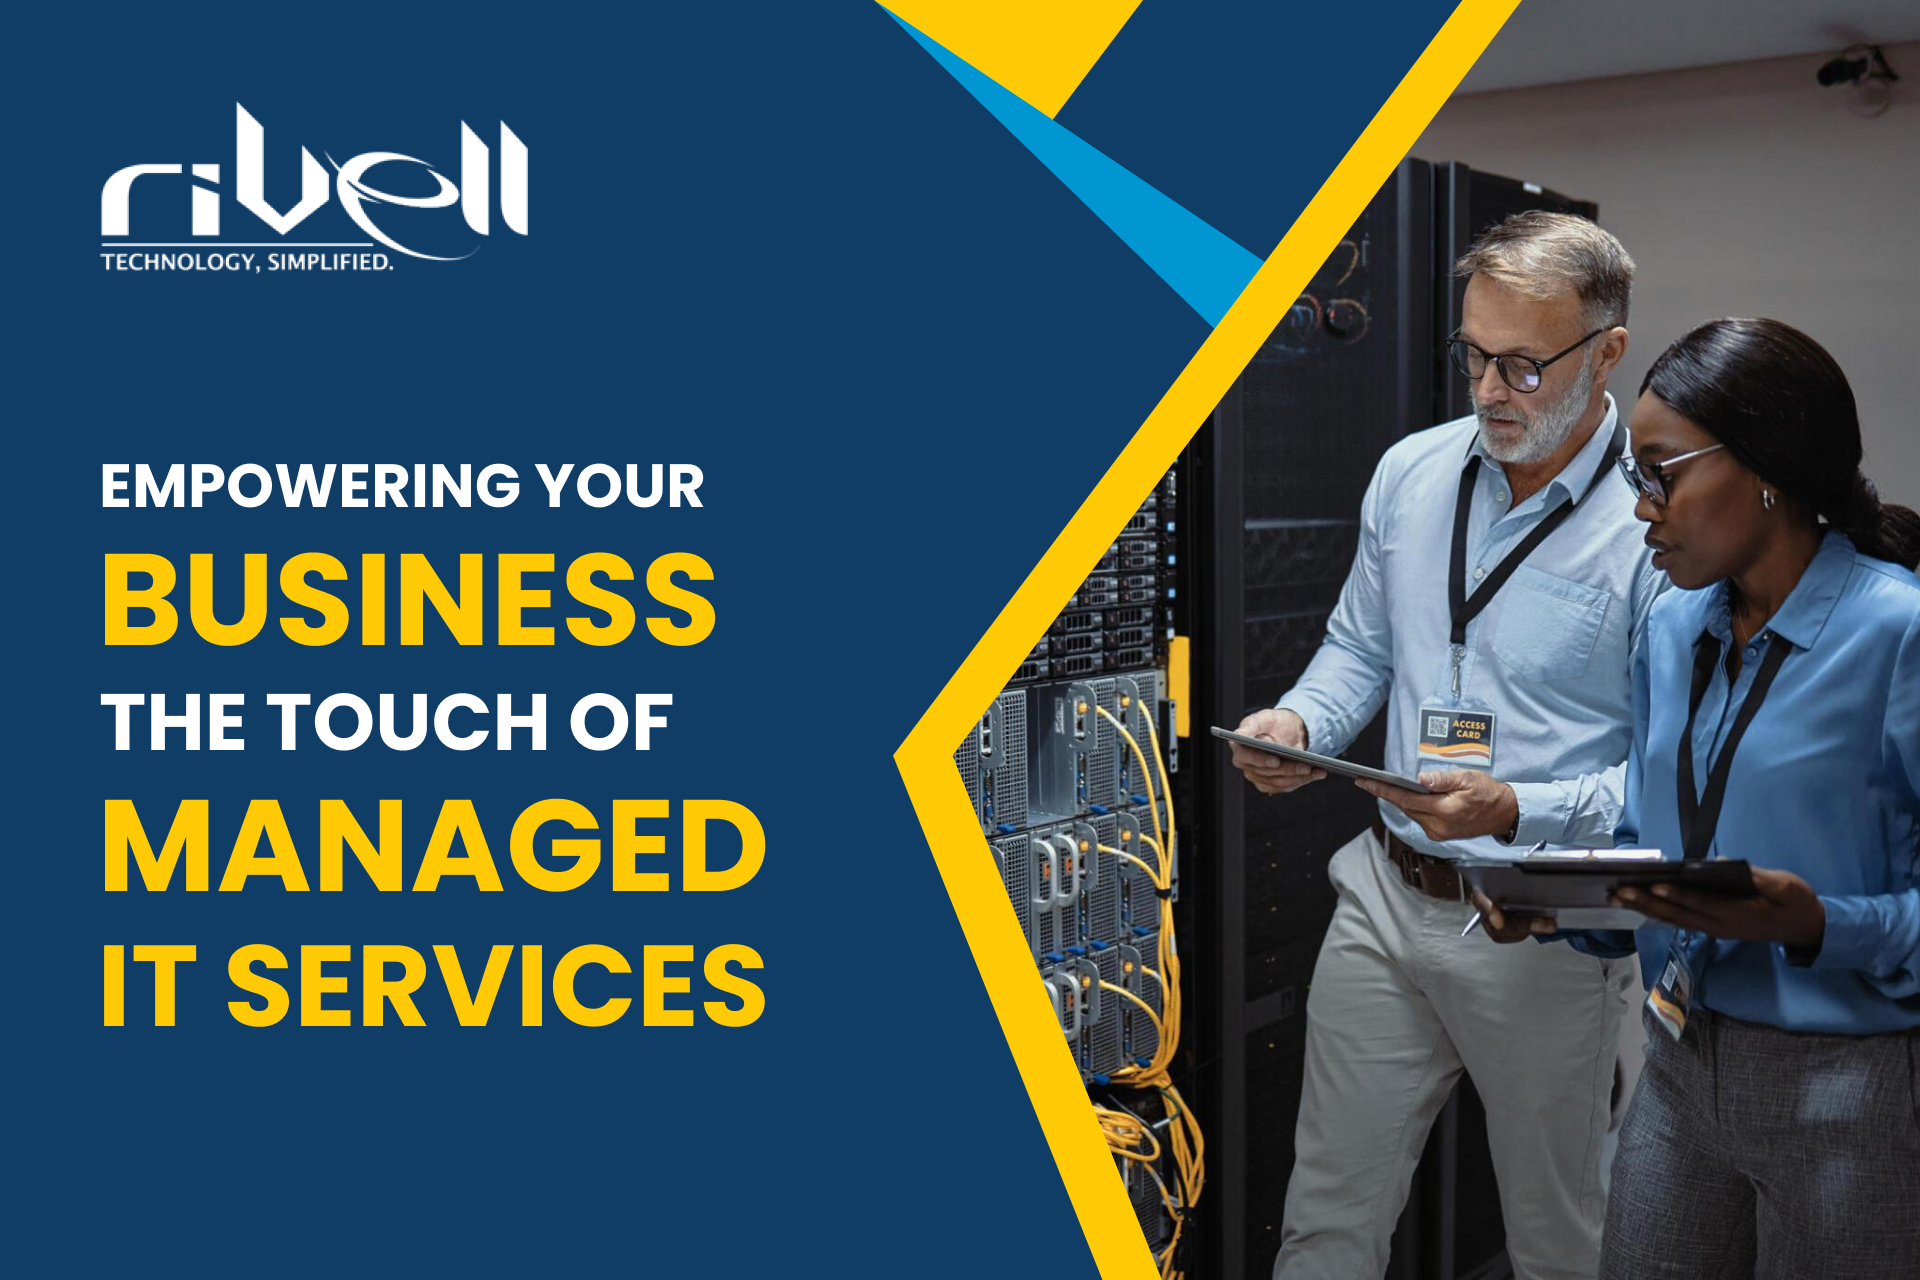 Empowering Your Business The Touch of Managed IT Services